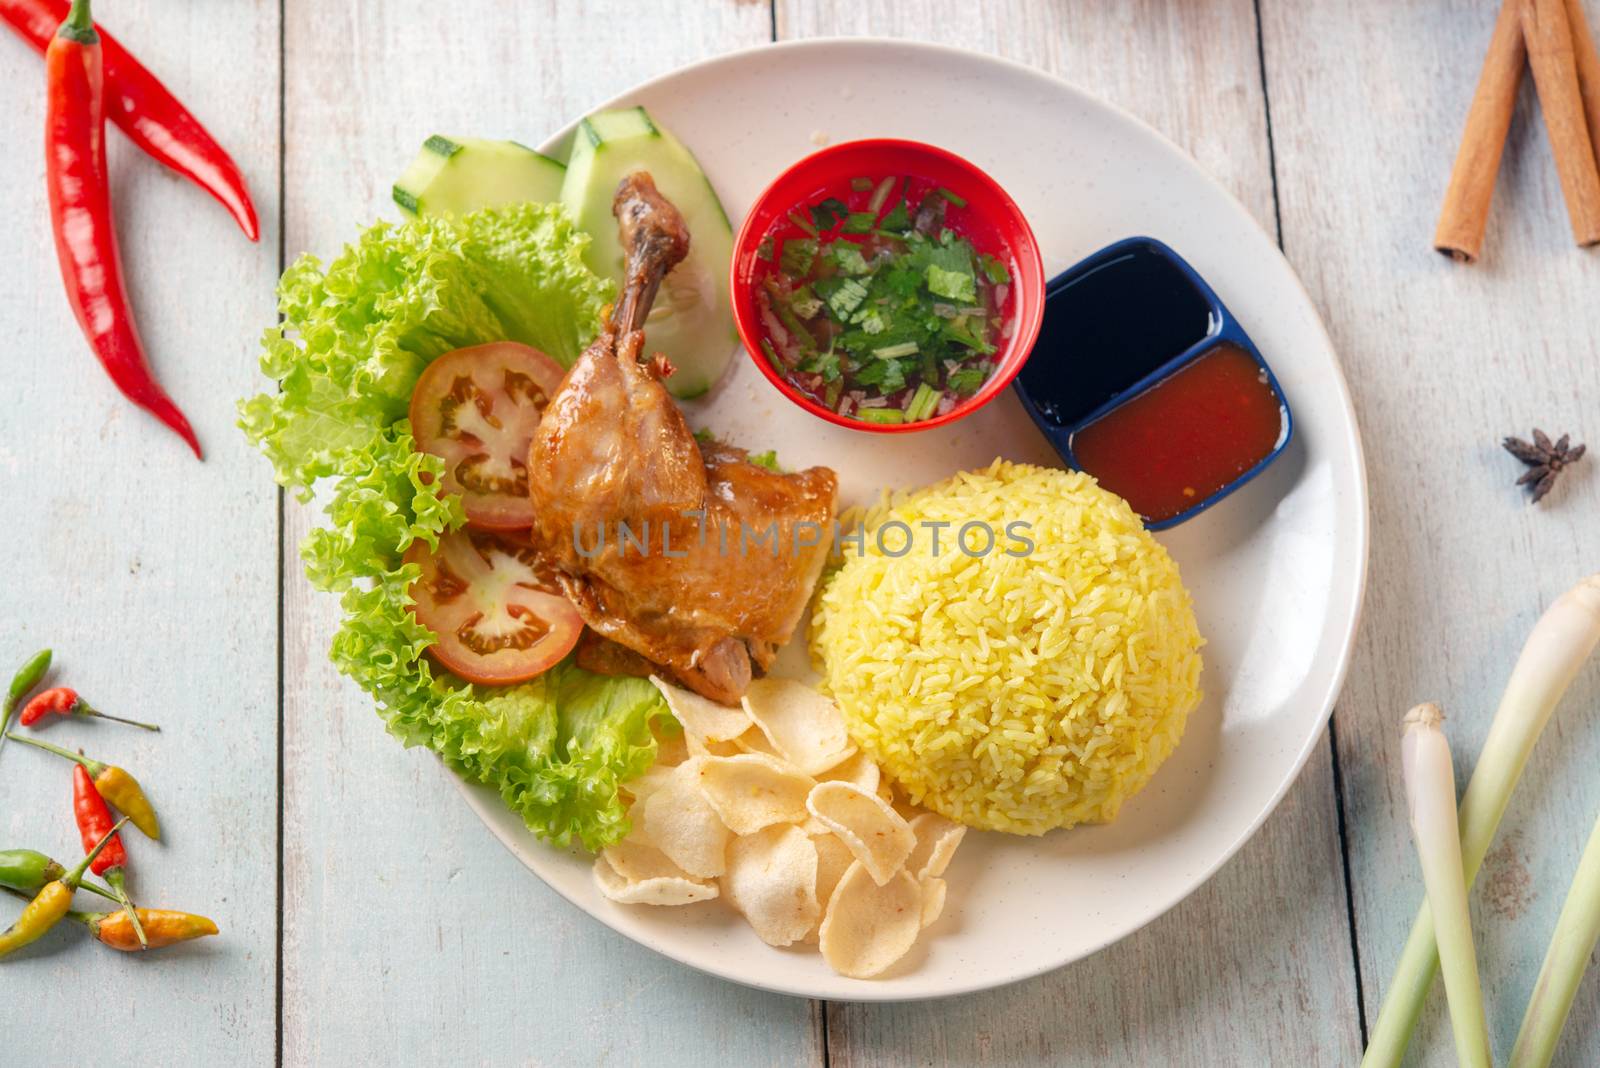 Chicken rice with drumstick, popular traditional Malaysian local food. Flat lay top down overhead view.